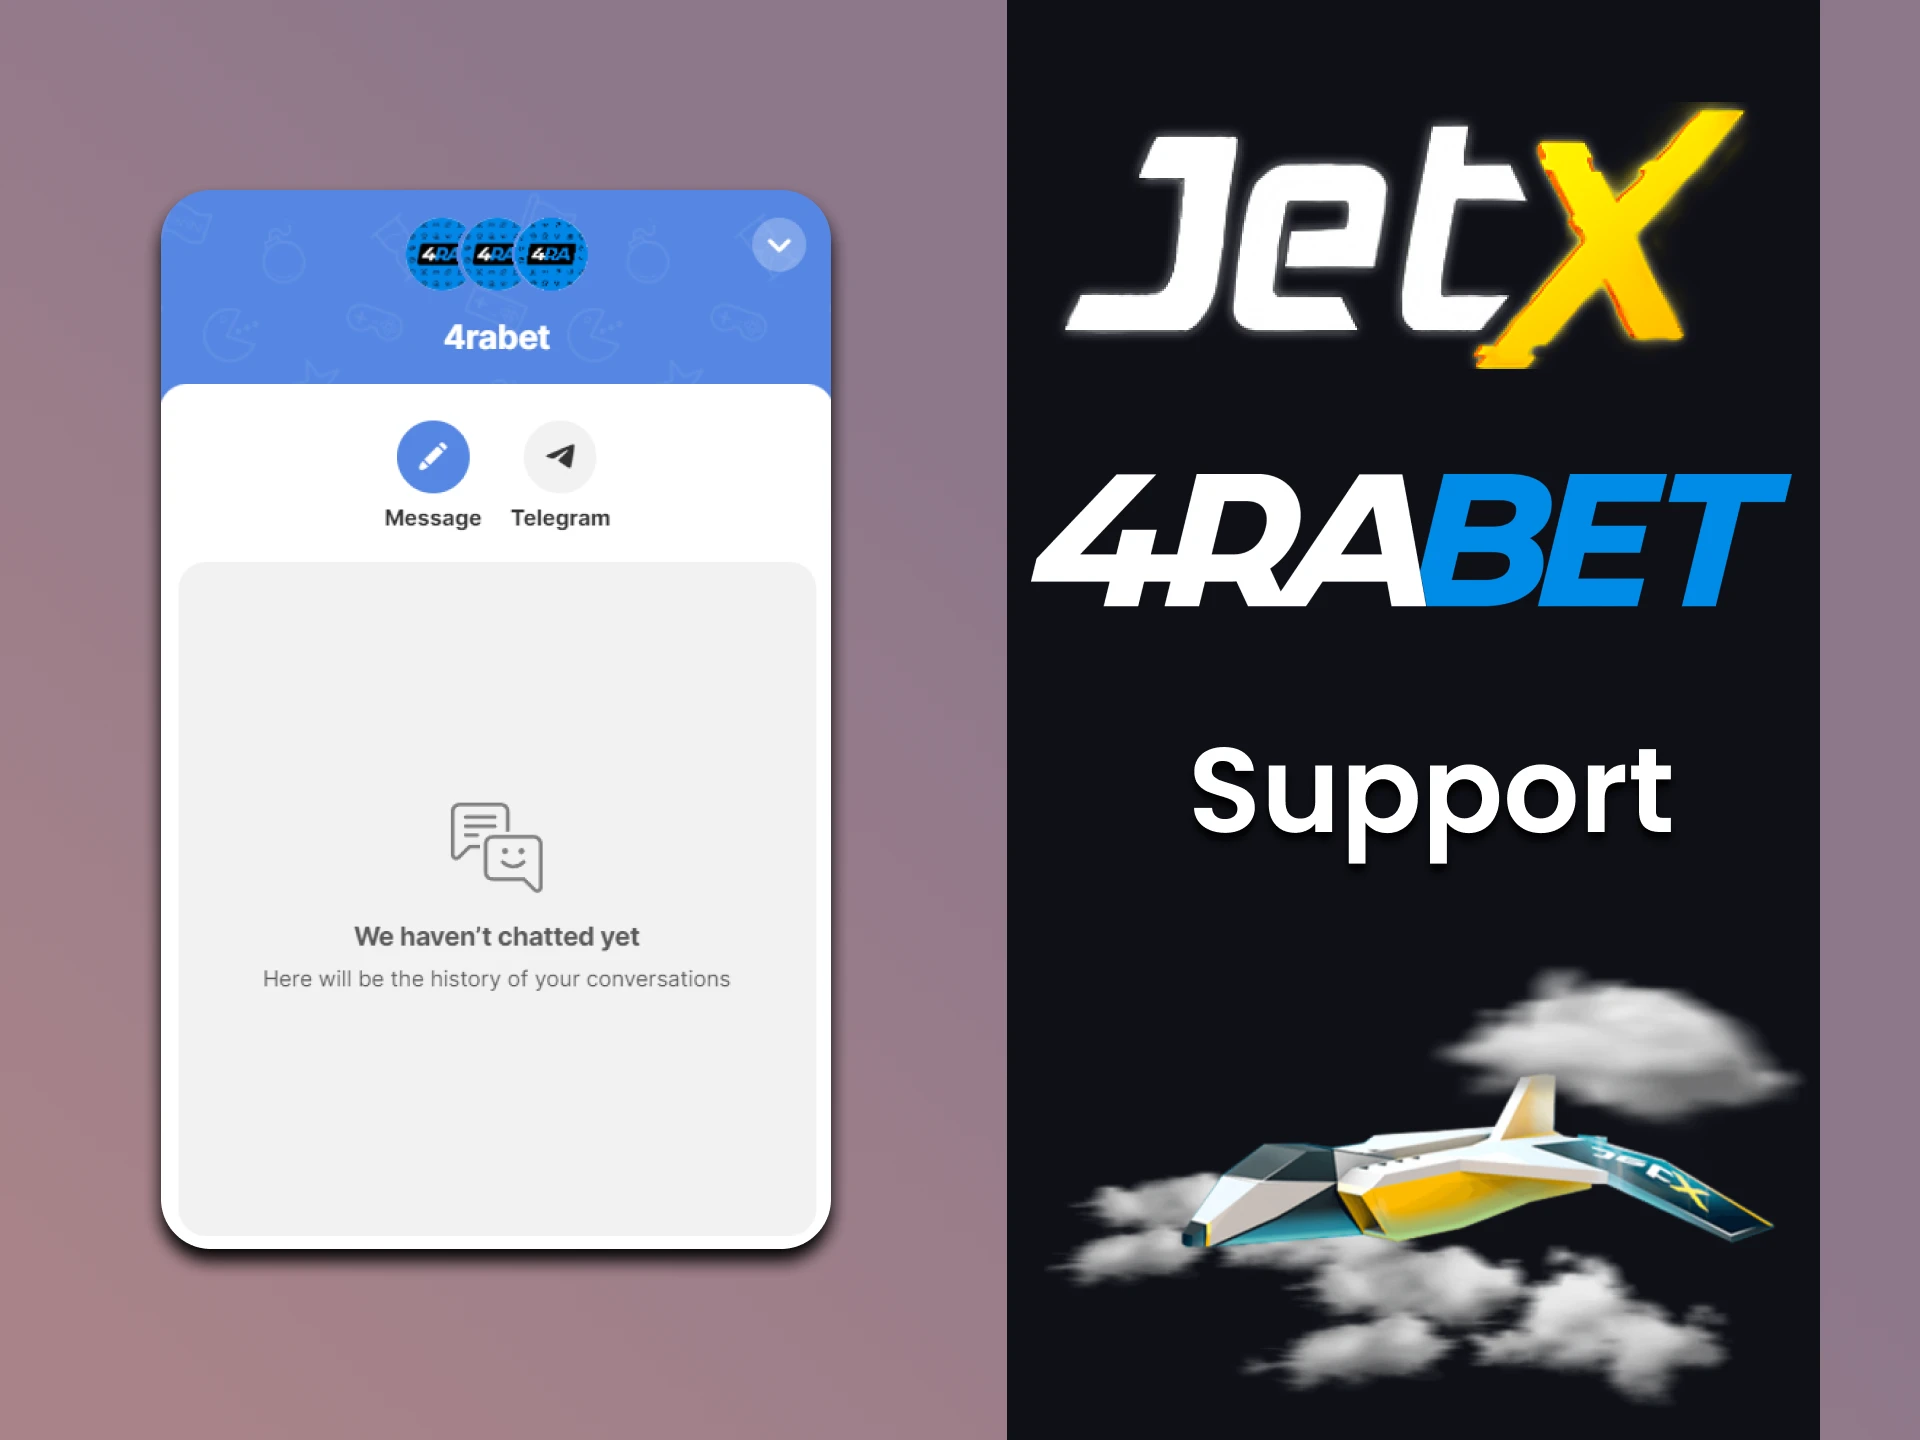 The 4rabet website has a support chat for JetX players.